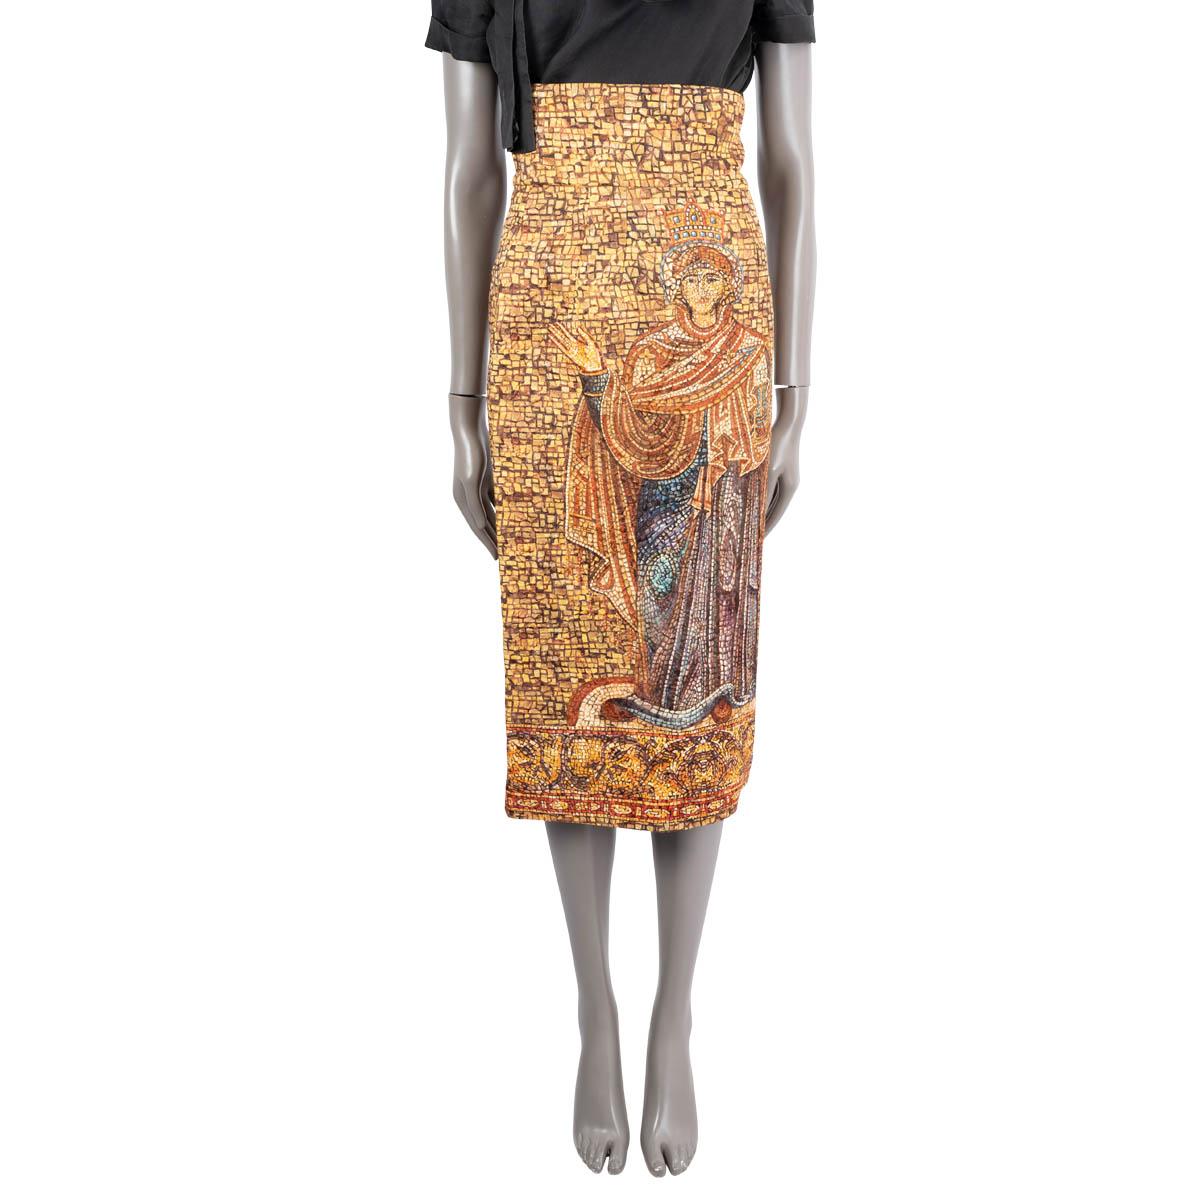 100% authentic Dolce & Gabbana Byzantine high waisted pencil skirt in brown, mustard , eggplant, grey and rust wool (88%) and silk (12%). Opens with a hidden zipper at the back and is lined in nude silk (96%) and elastane (4%). Has been worn and is